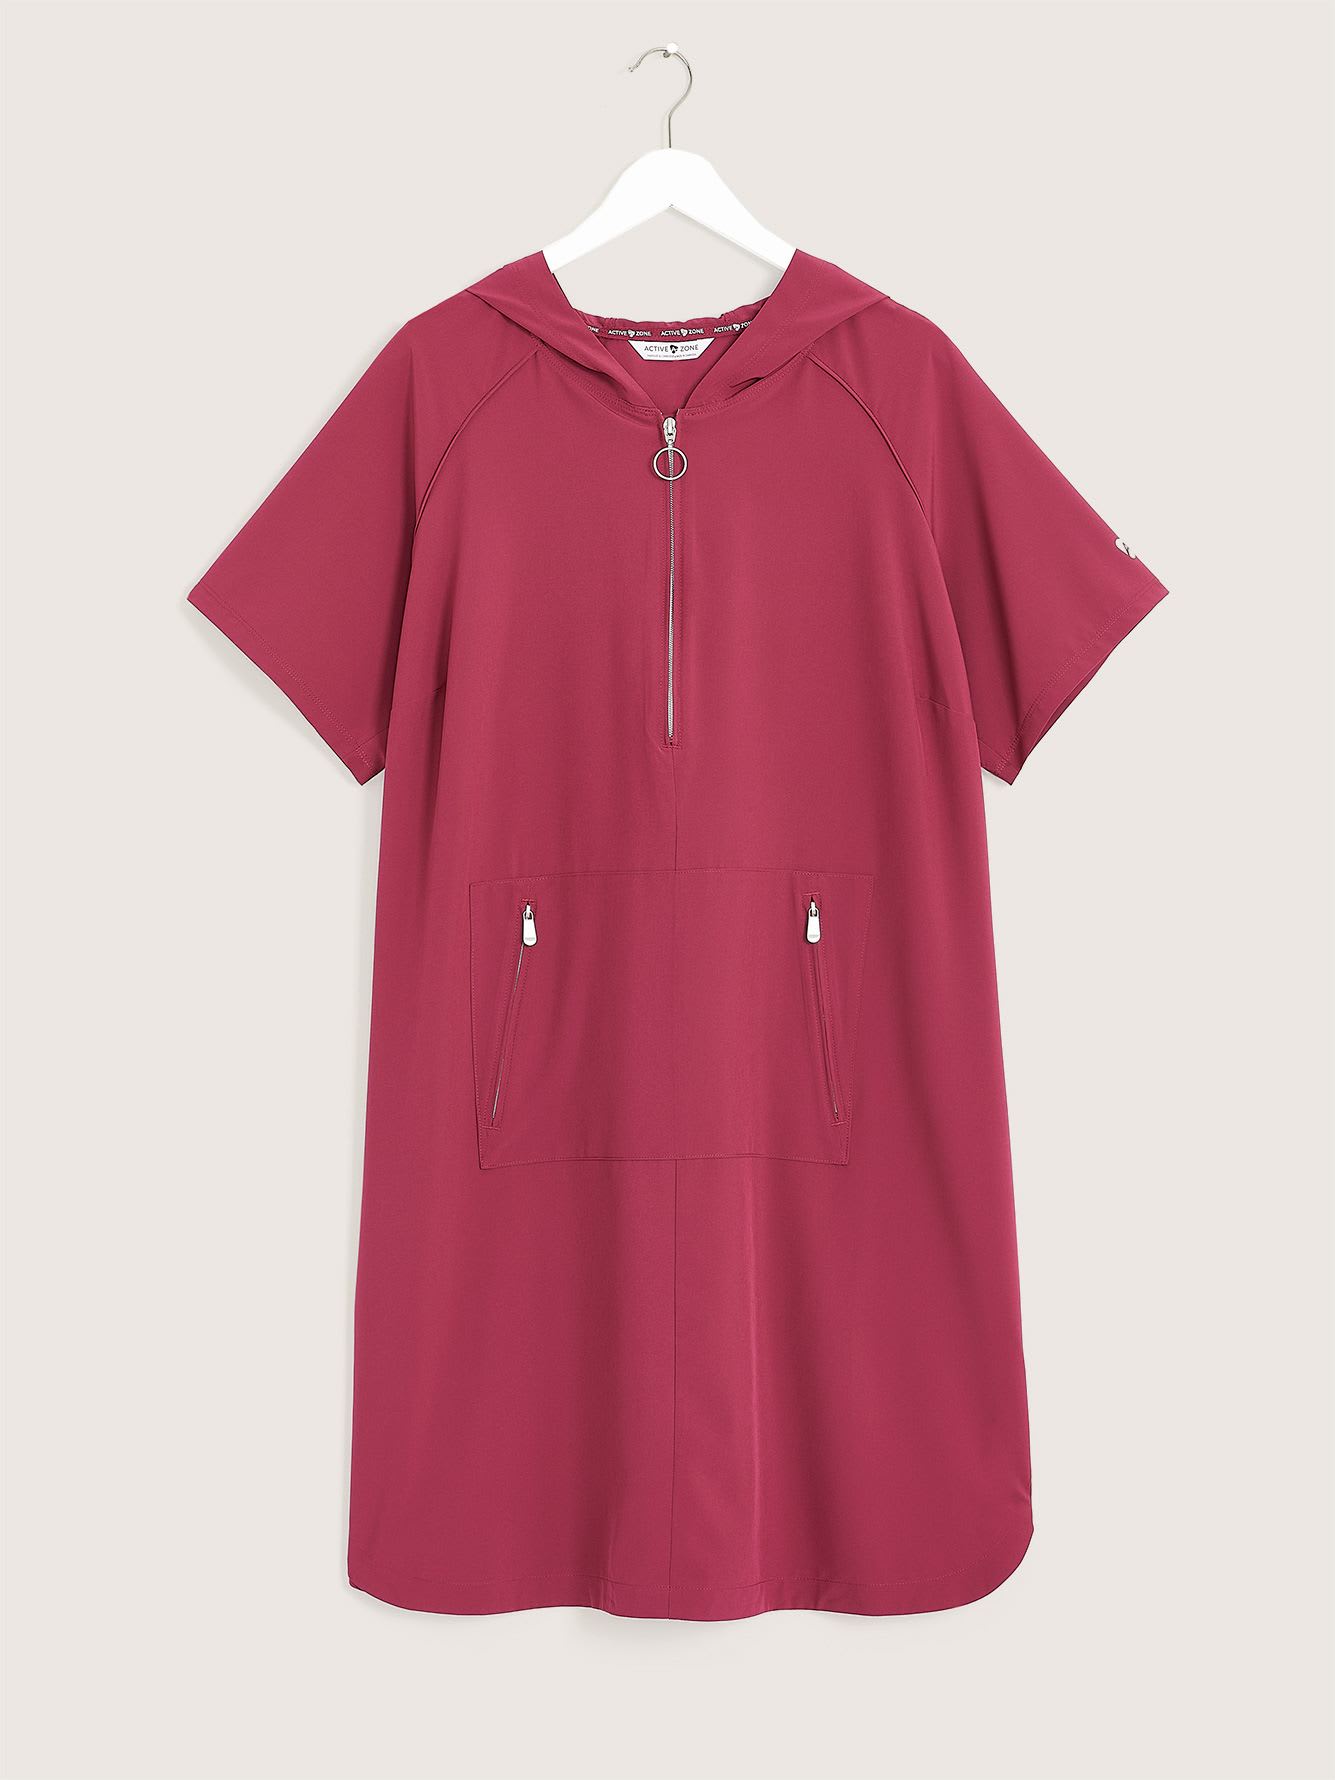 Responsible, 4-Way Stretch Hooded Dress - ActiveZone